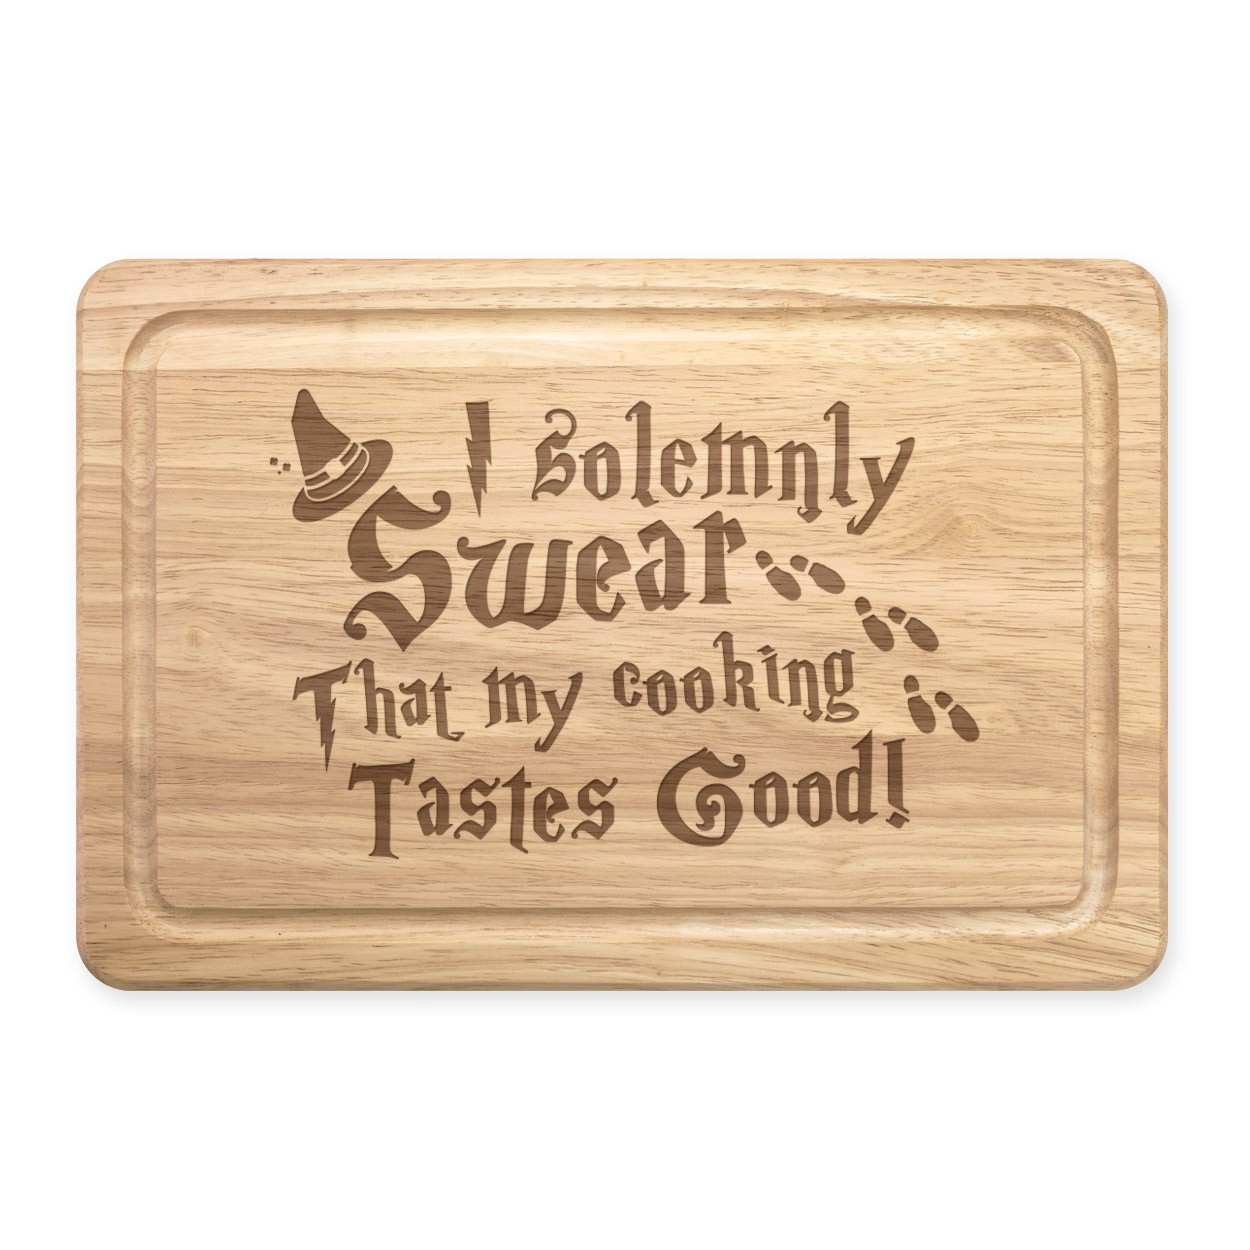 I Solemnly Swear That My Cooking Tastes Good Rectangular Wooden Chopping Board